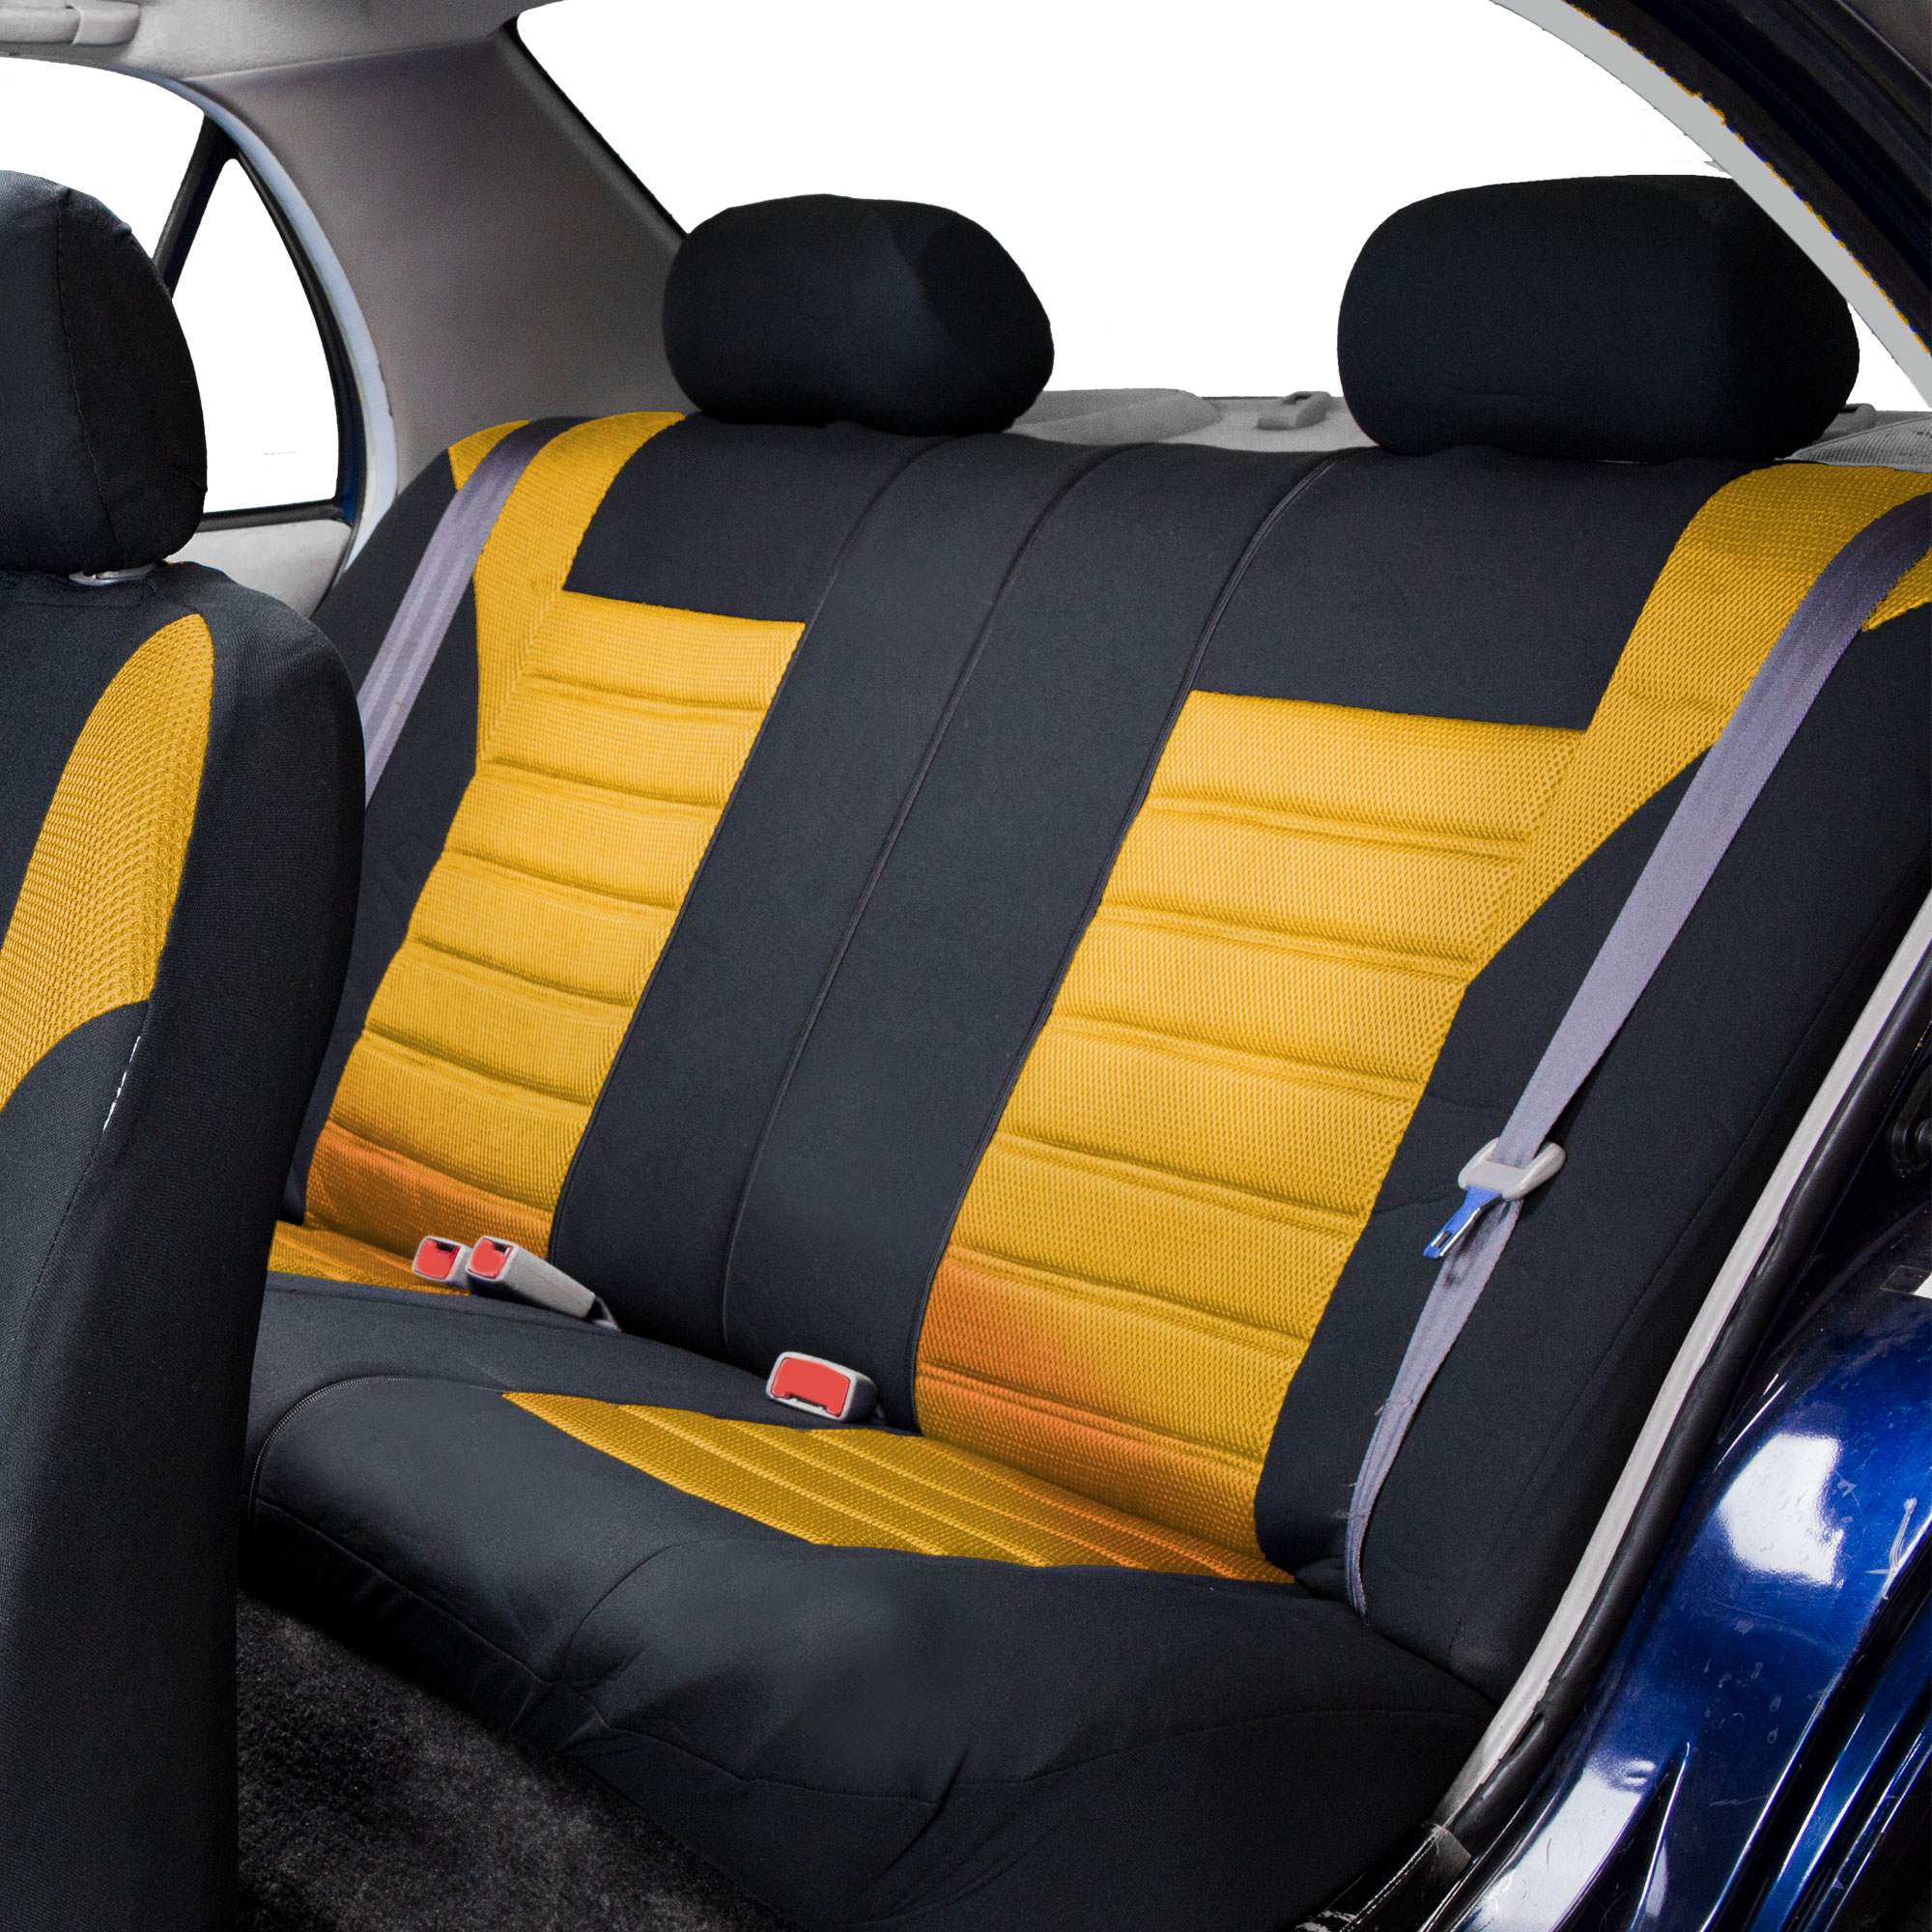 FH Group 3 Row 8 Seaters SUV Seat Covers for Auto 3D Mesh Yellow Black Free Gift